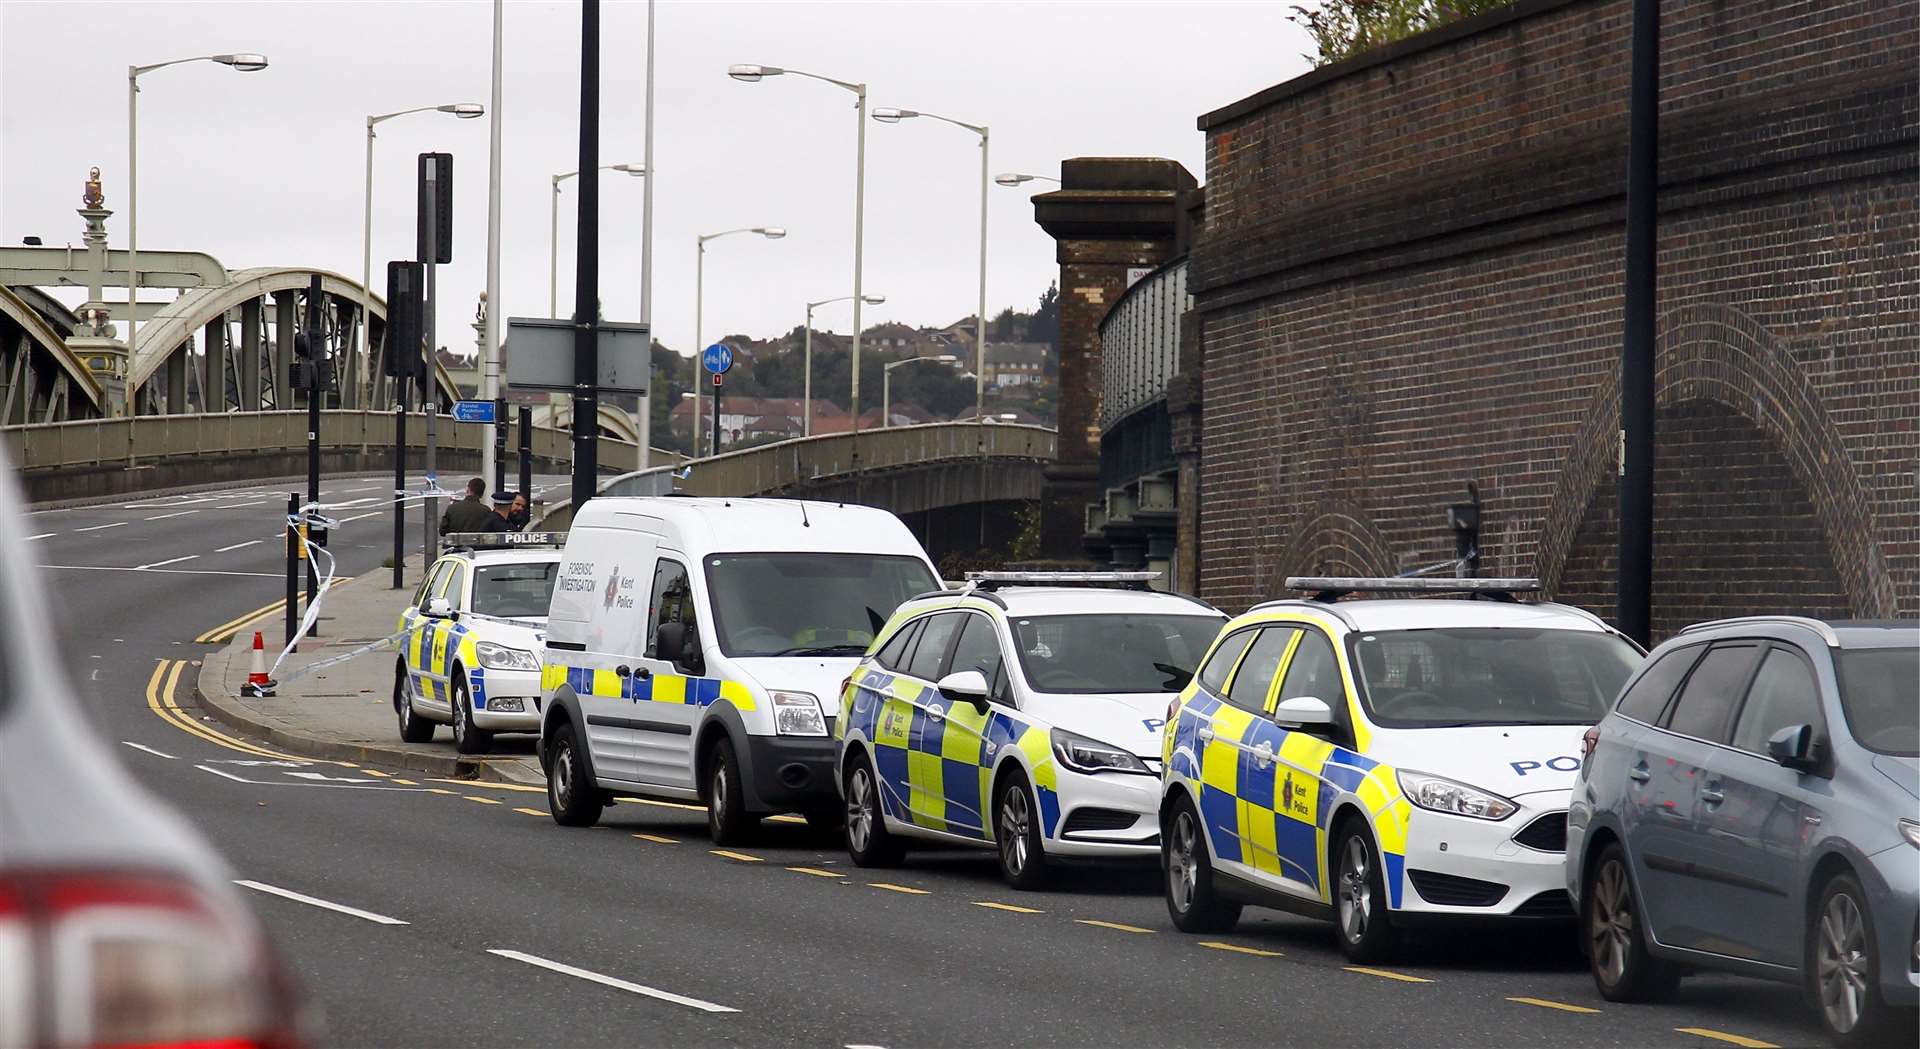 A heavy police attendance followed the discovery of a body near Rochester Bridge